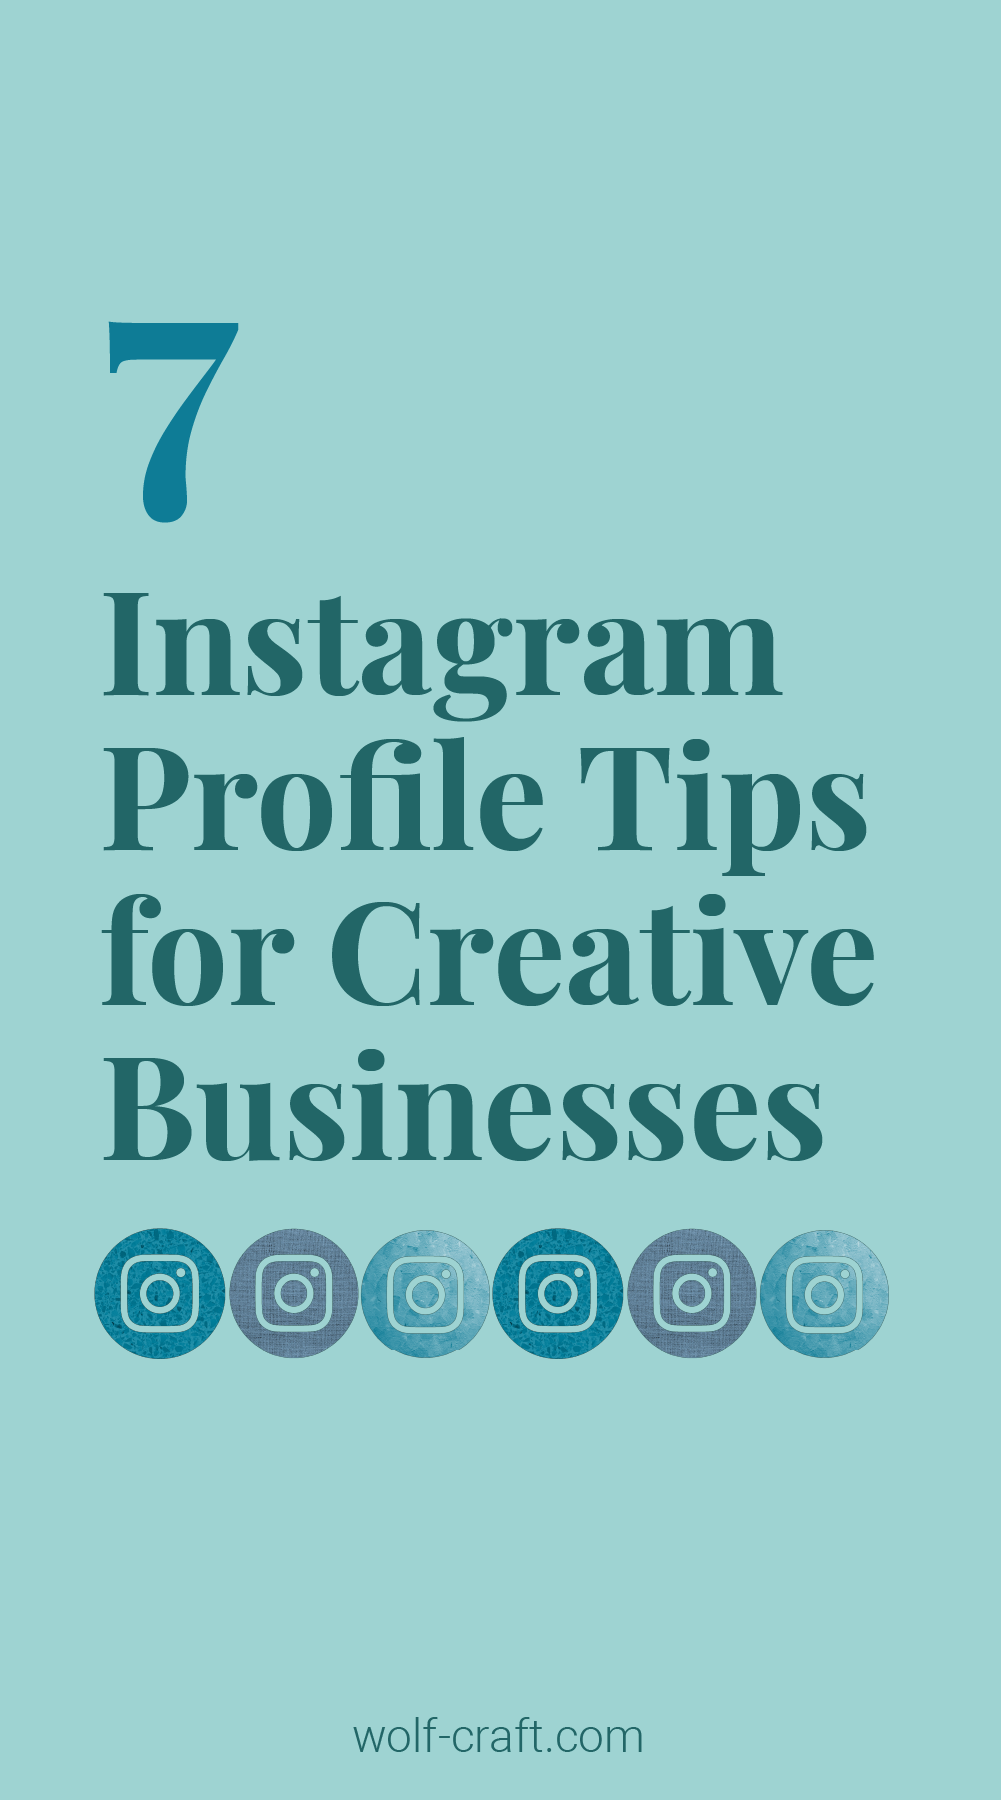 How to Improve Your Instagram Profile: 7 tips for Creative Businesses ...